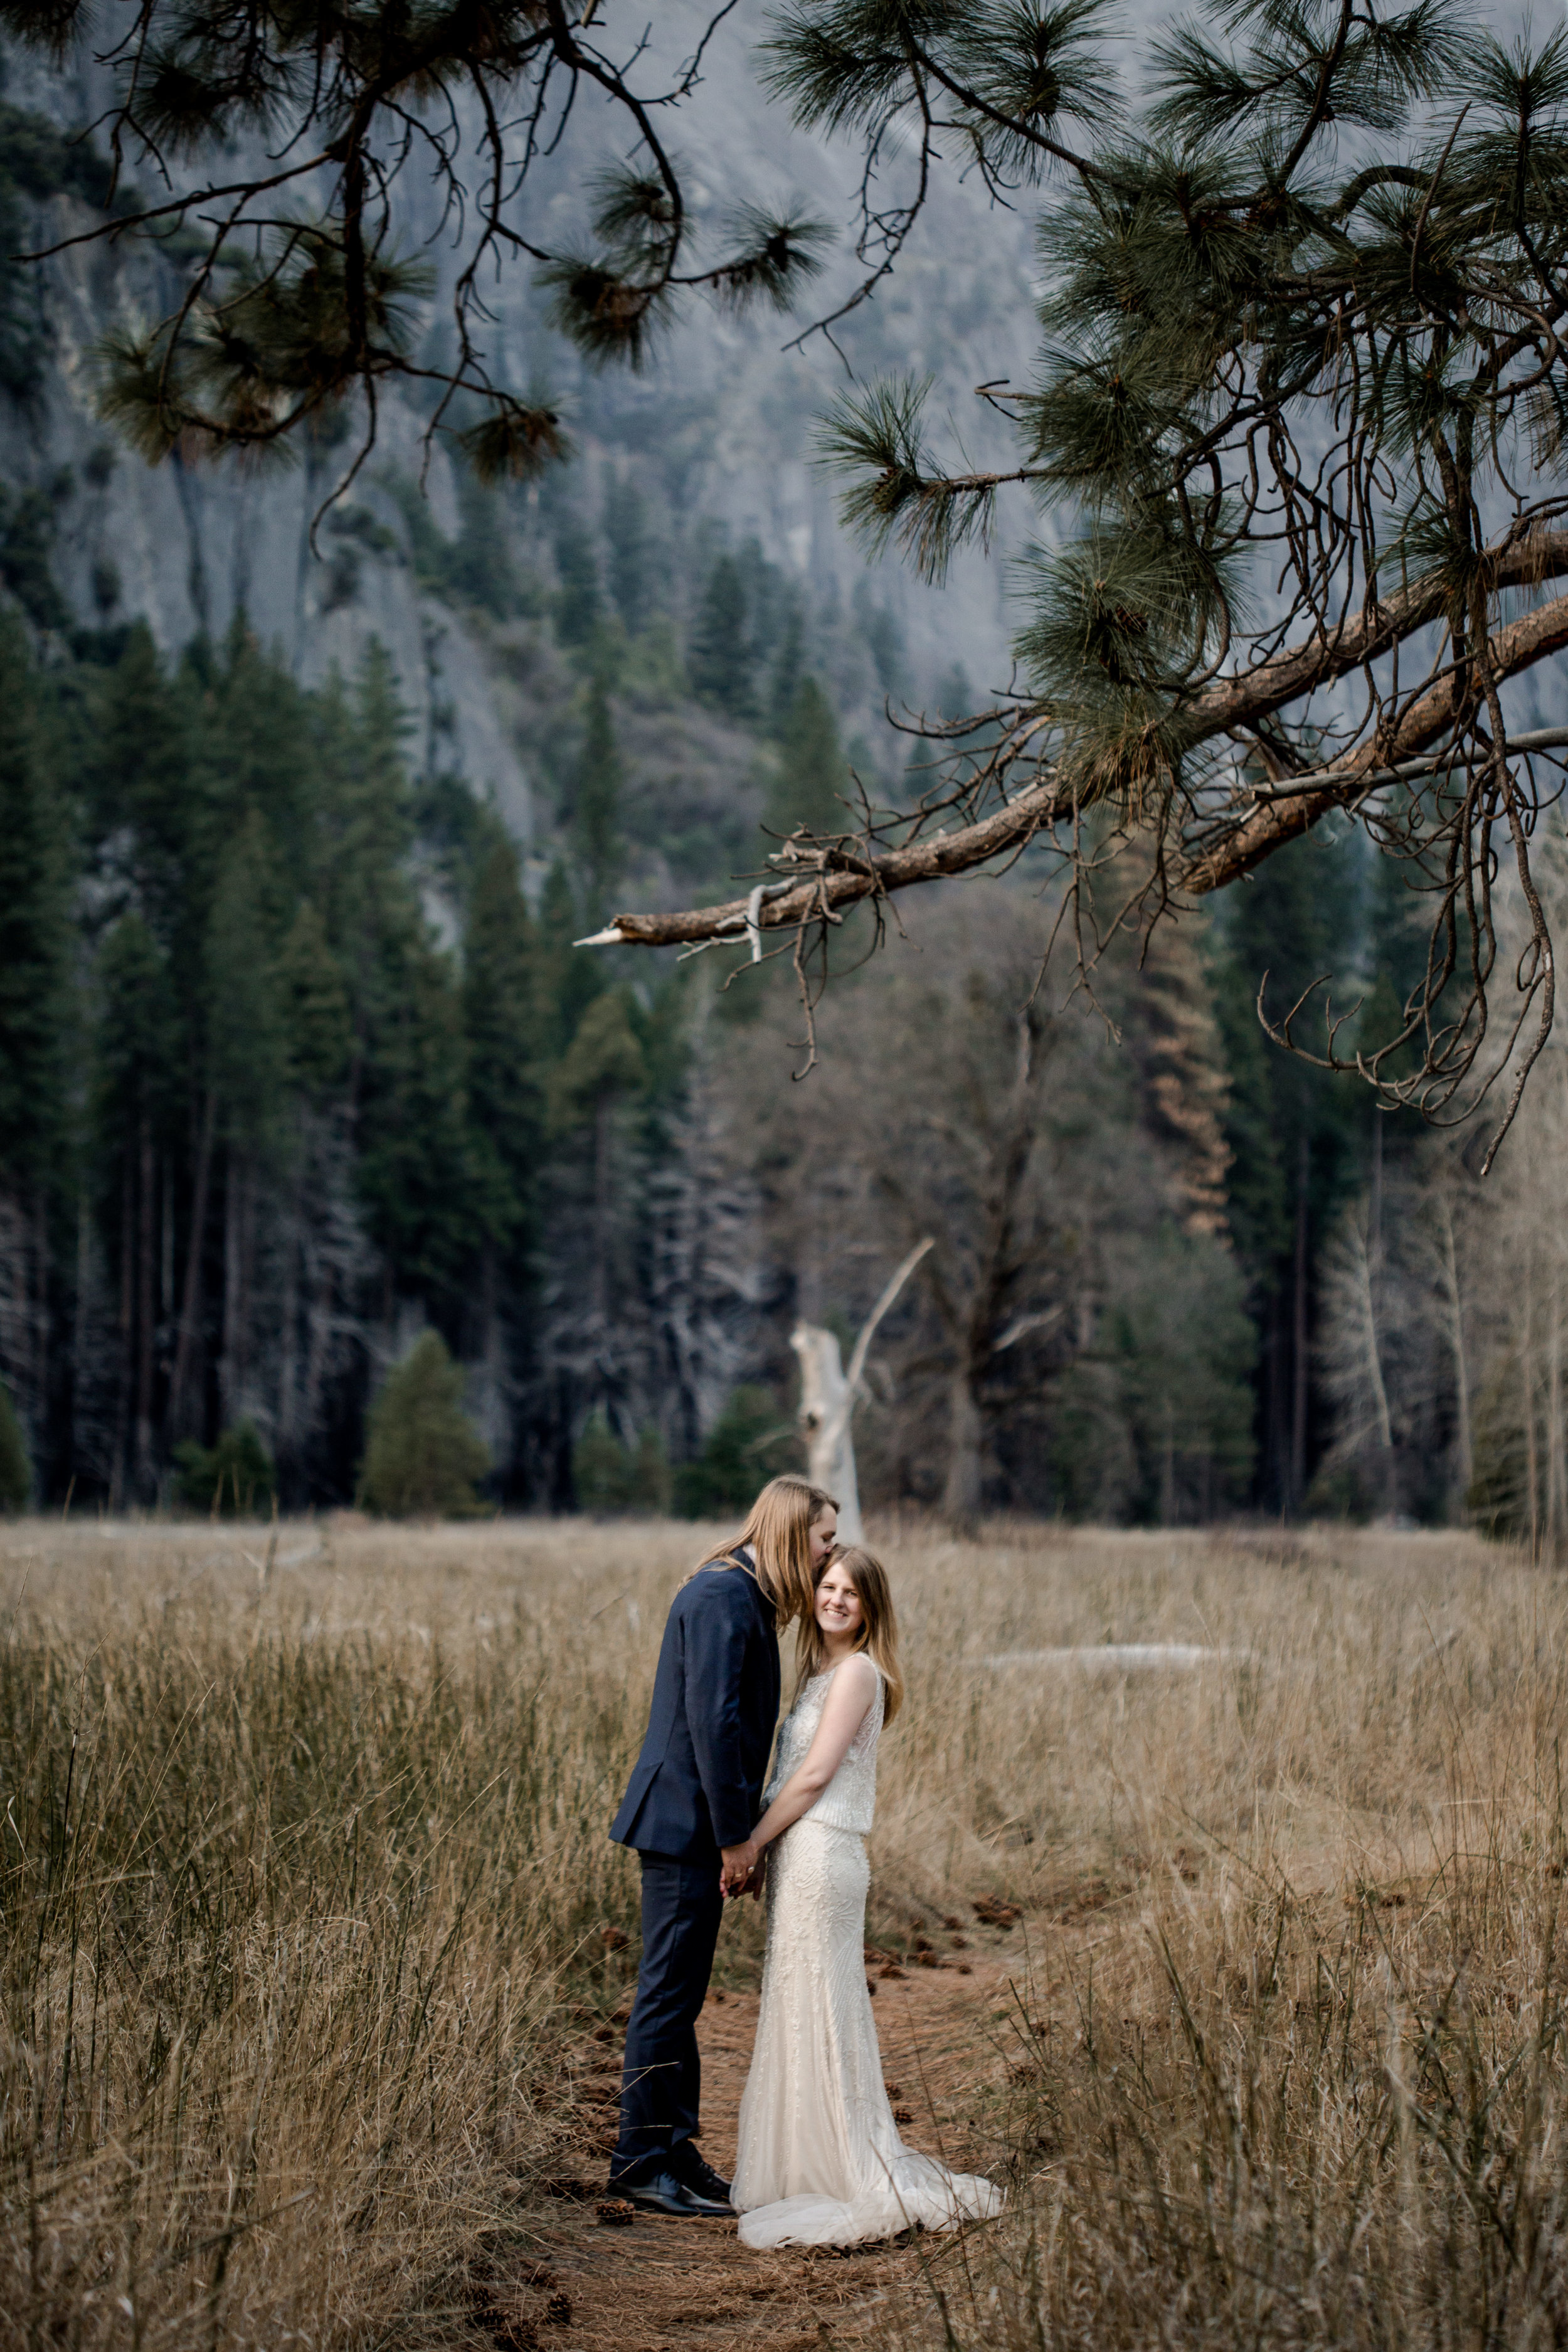 nicole-daacke-photography-yousemite-national-park-elopement-photographer-winter-cloud-moody-elope-inspiration-yosemite-valley-tunnel-view-winter-cloud-fog-weather-wedding-photos-74.jpg